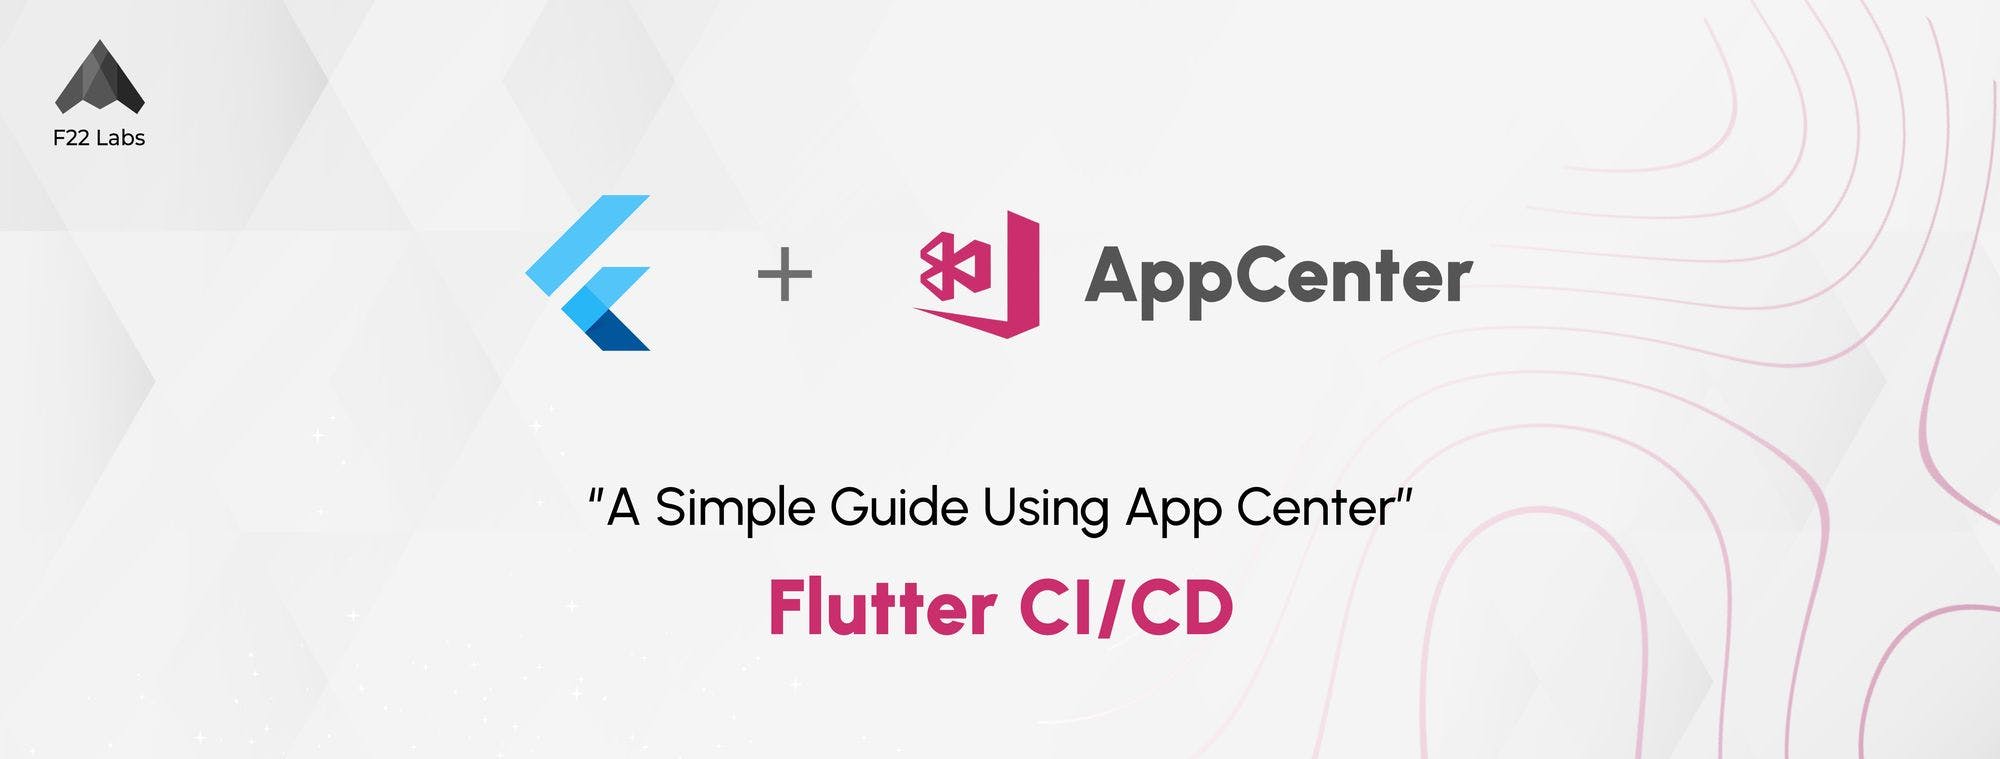 Flutter CI/CD Workflow: A Simple Guide Using App Center Cover